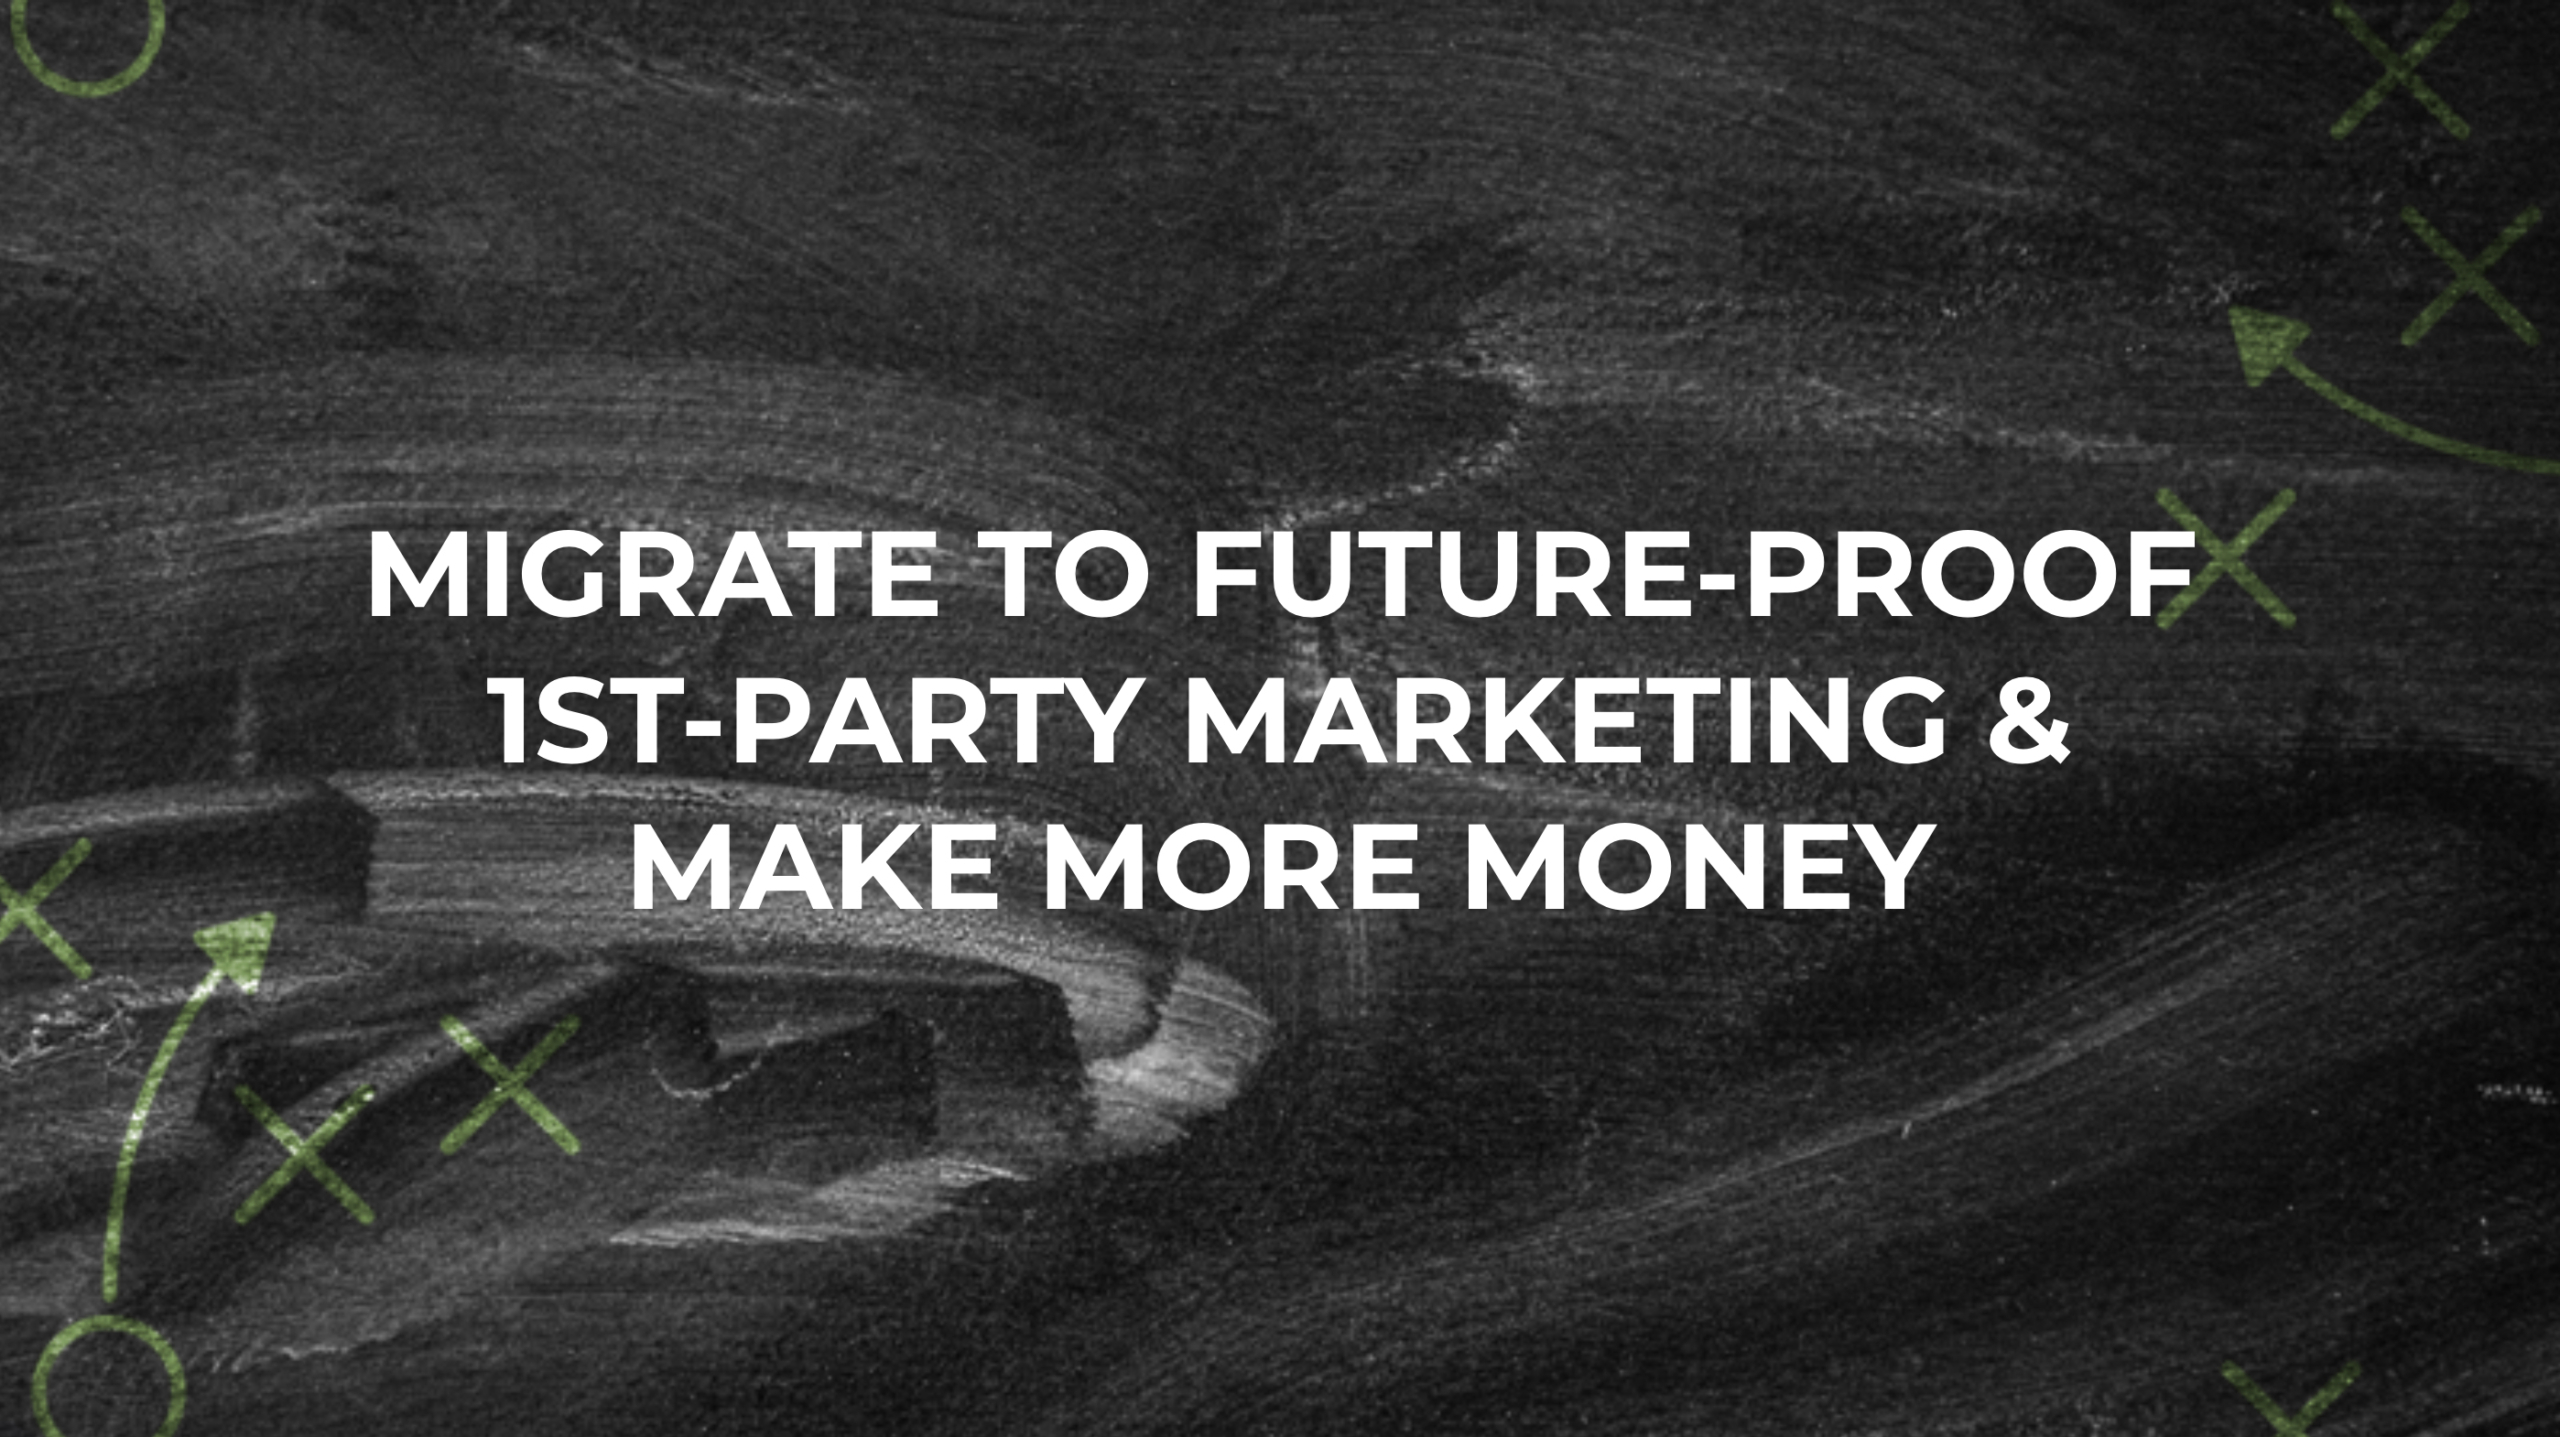 Migrate to future-proof first party marketing and make more money text on gray chalkboard background